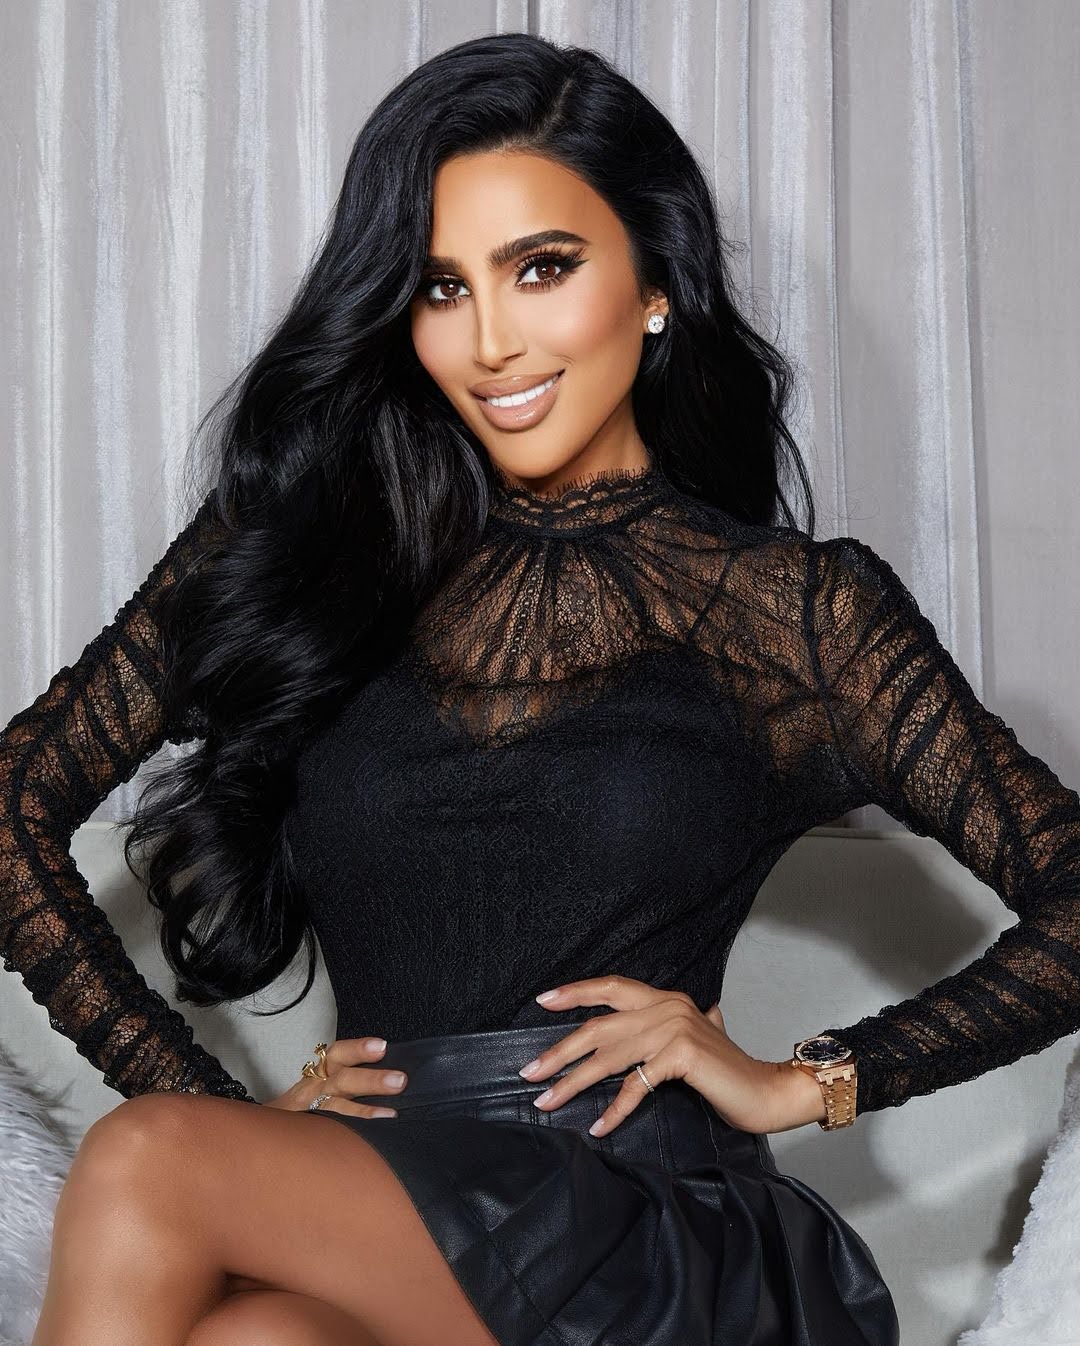 Lilly Ghalichi - Age, Wiki, Biography, Trivia, and Photos - FilmiFeed.